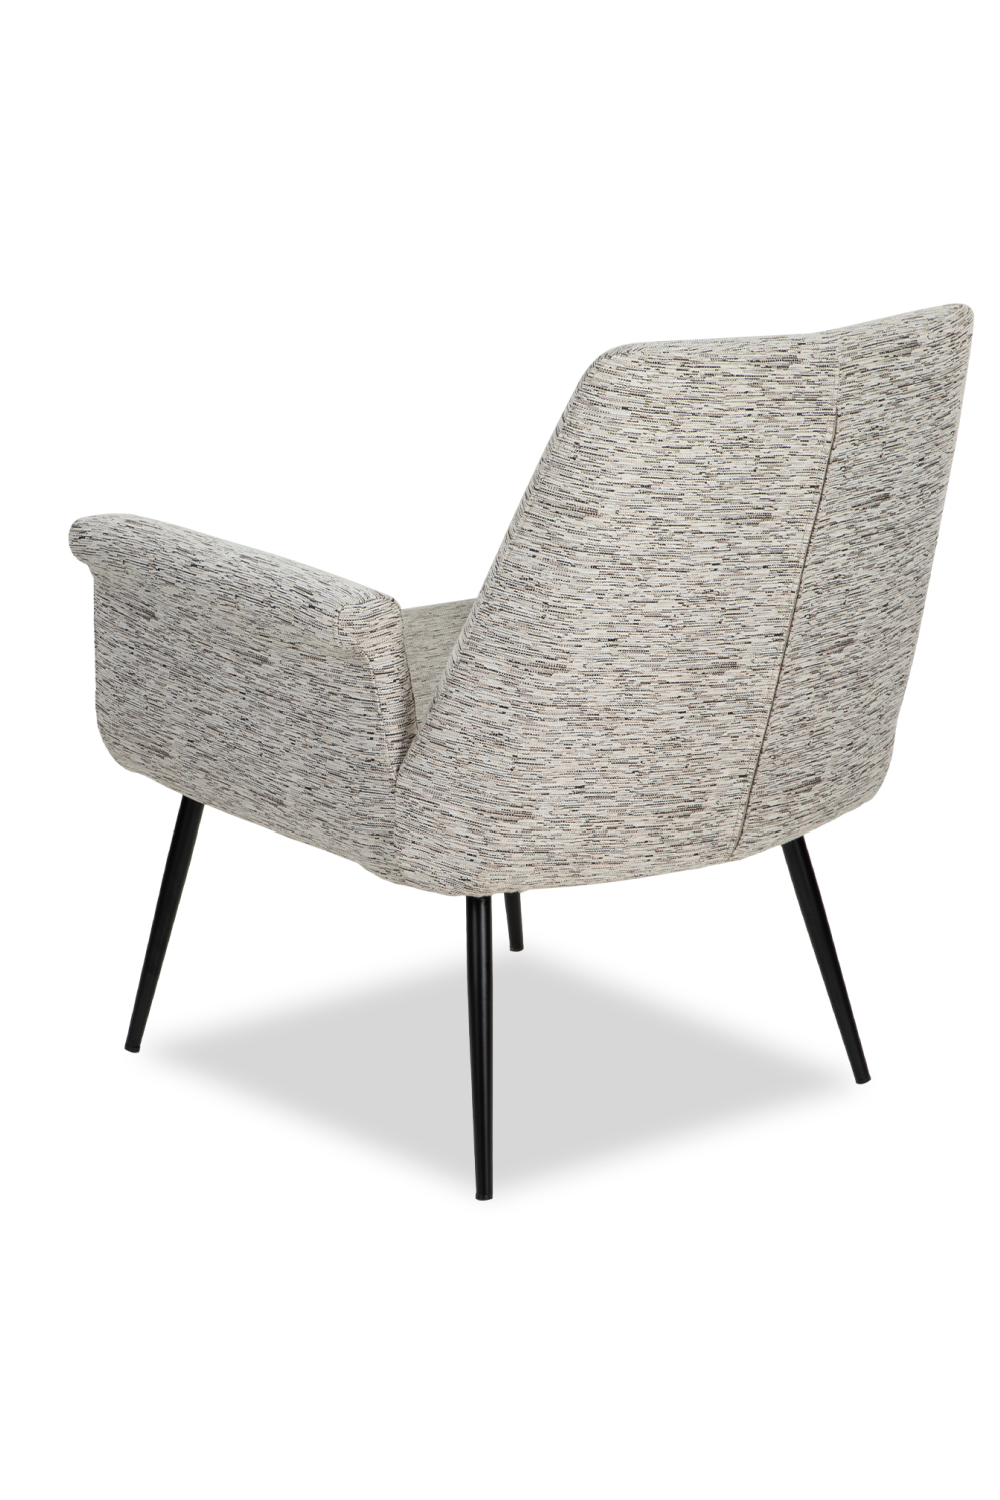 Gray Bouclé Upholstery Occasional Chair | Liang & Eimil Fiore | OROA.com